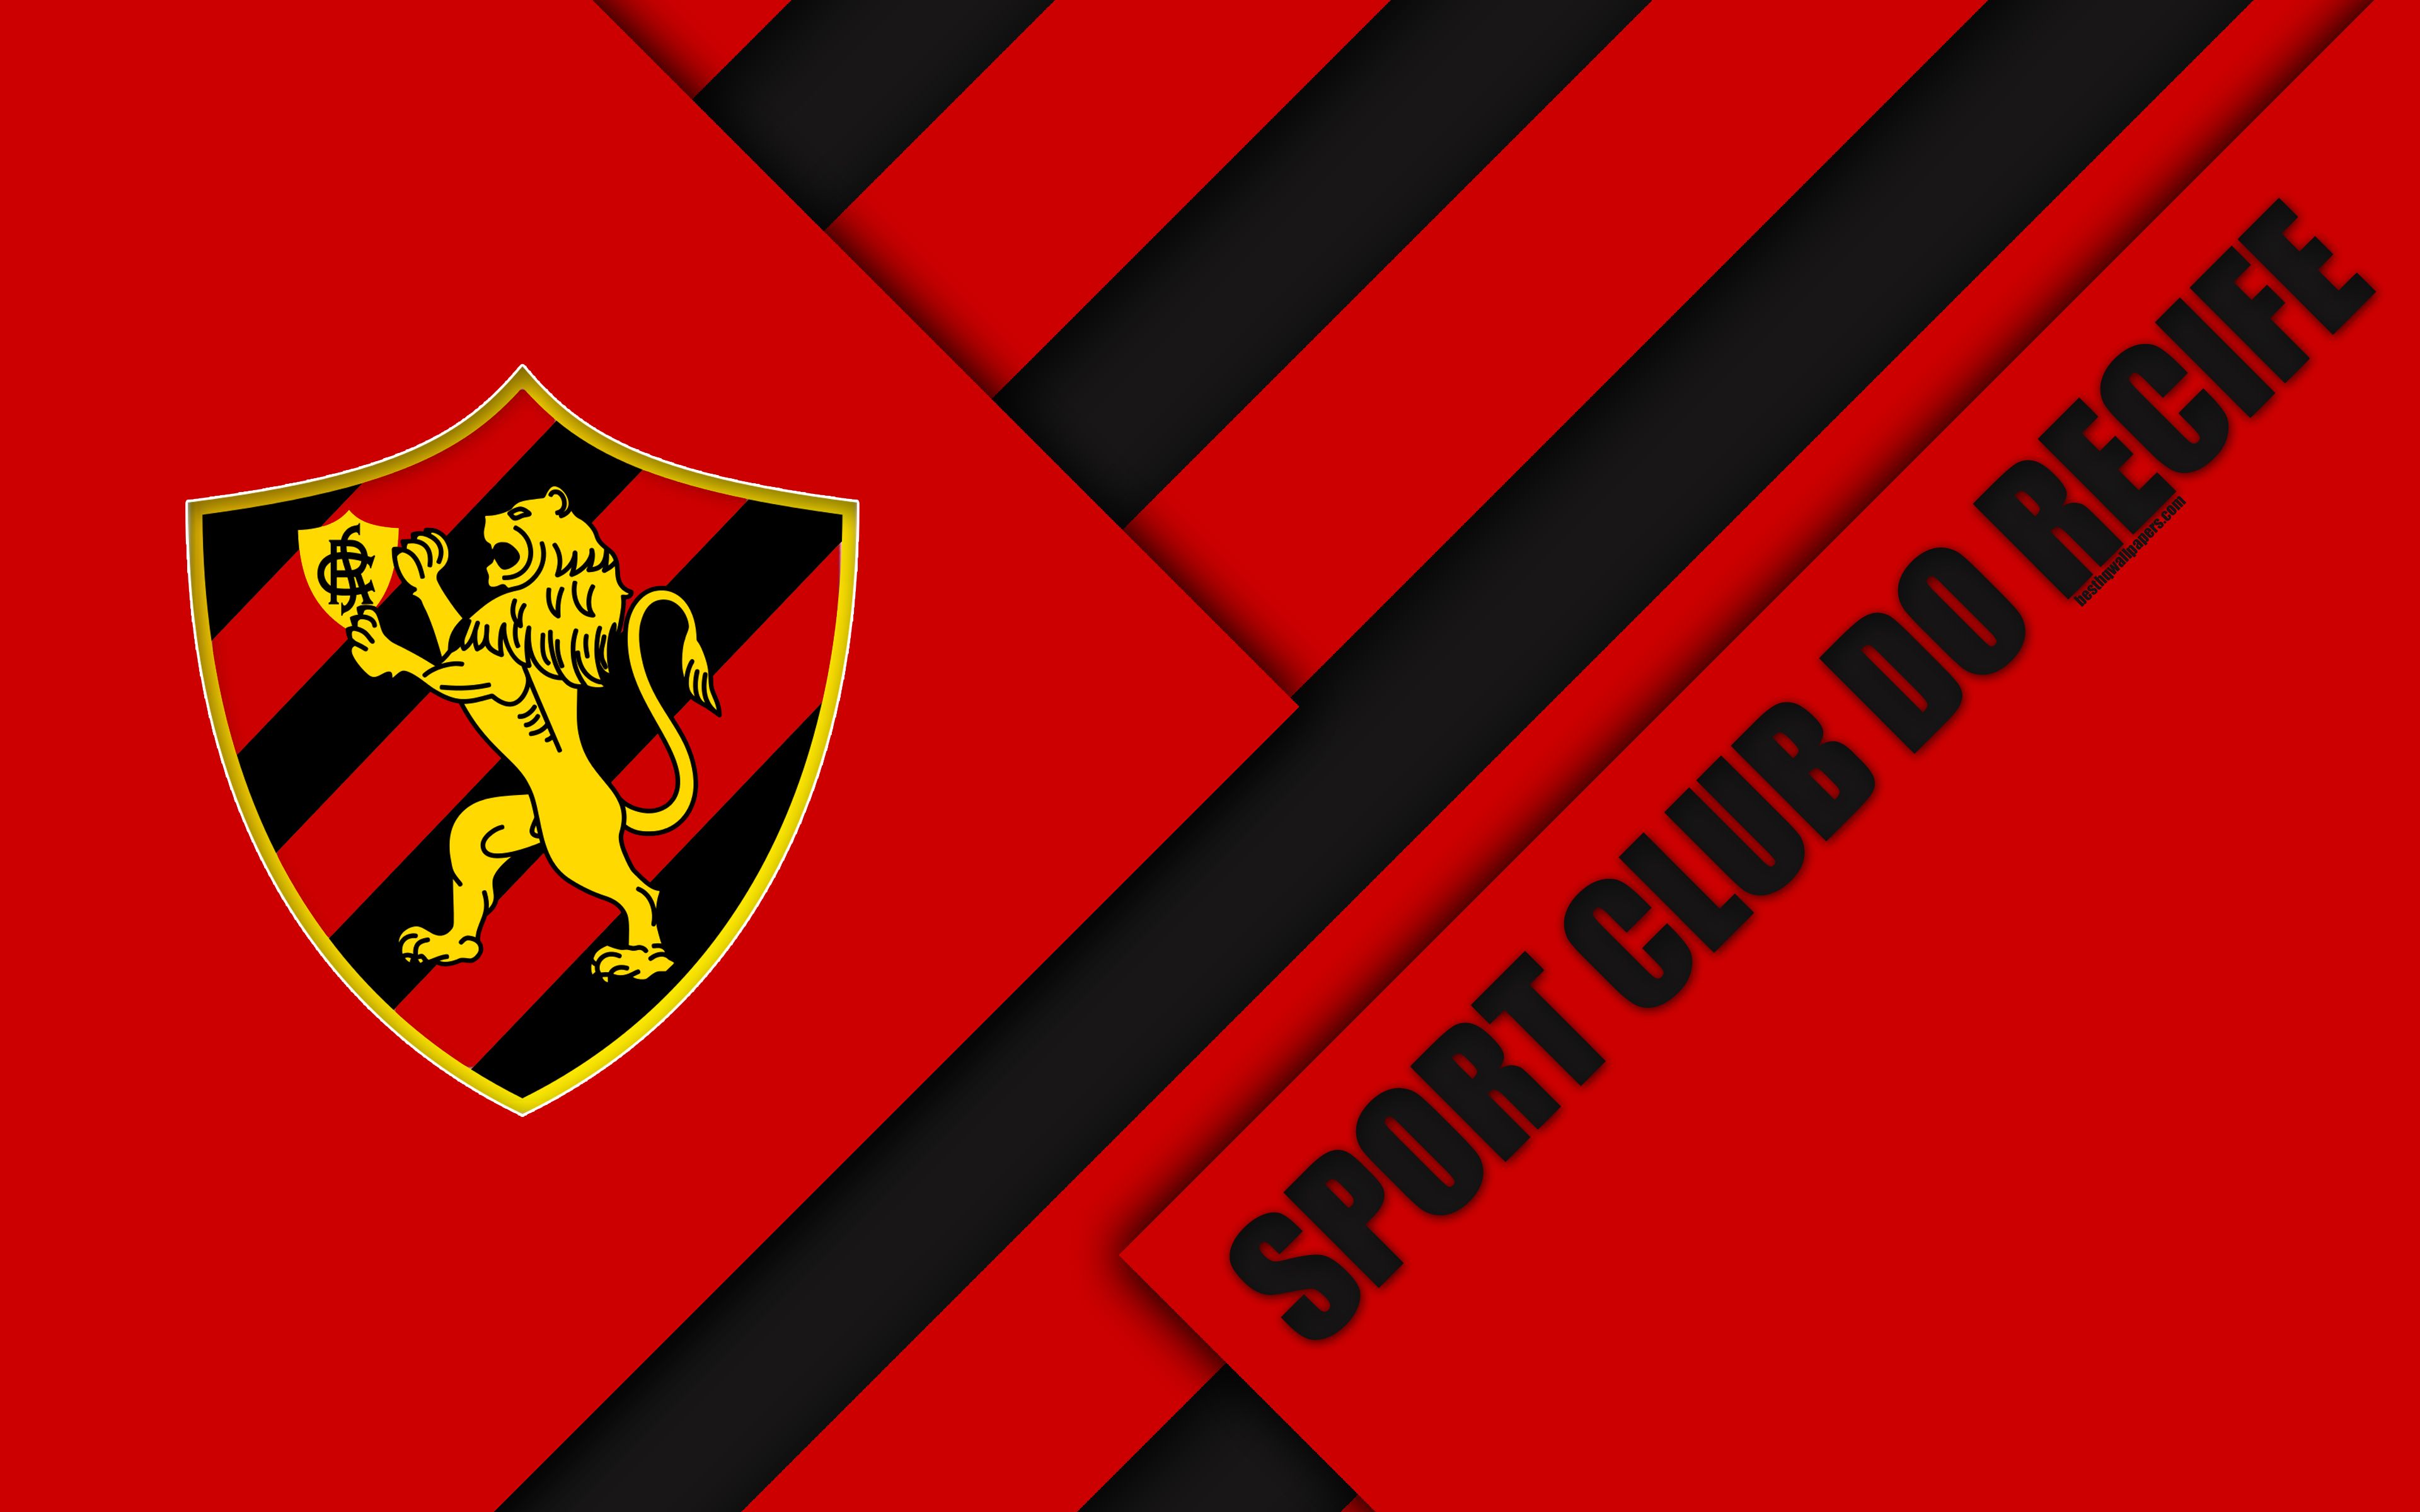 Download wallpaper Sport Club do Recif FC, Pernambuco, Brazil, 4k, material design, red black abstraction, Brazilian football club, Serie A, football for desktop with resolution 3840x2400. High Quality HD picture wallpaper